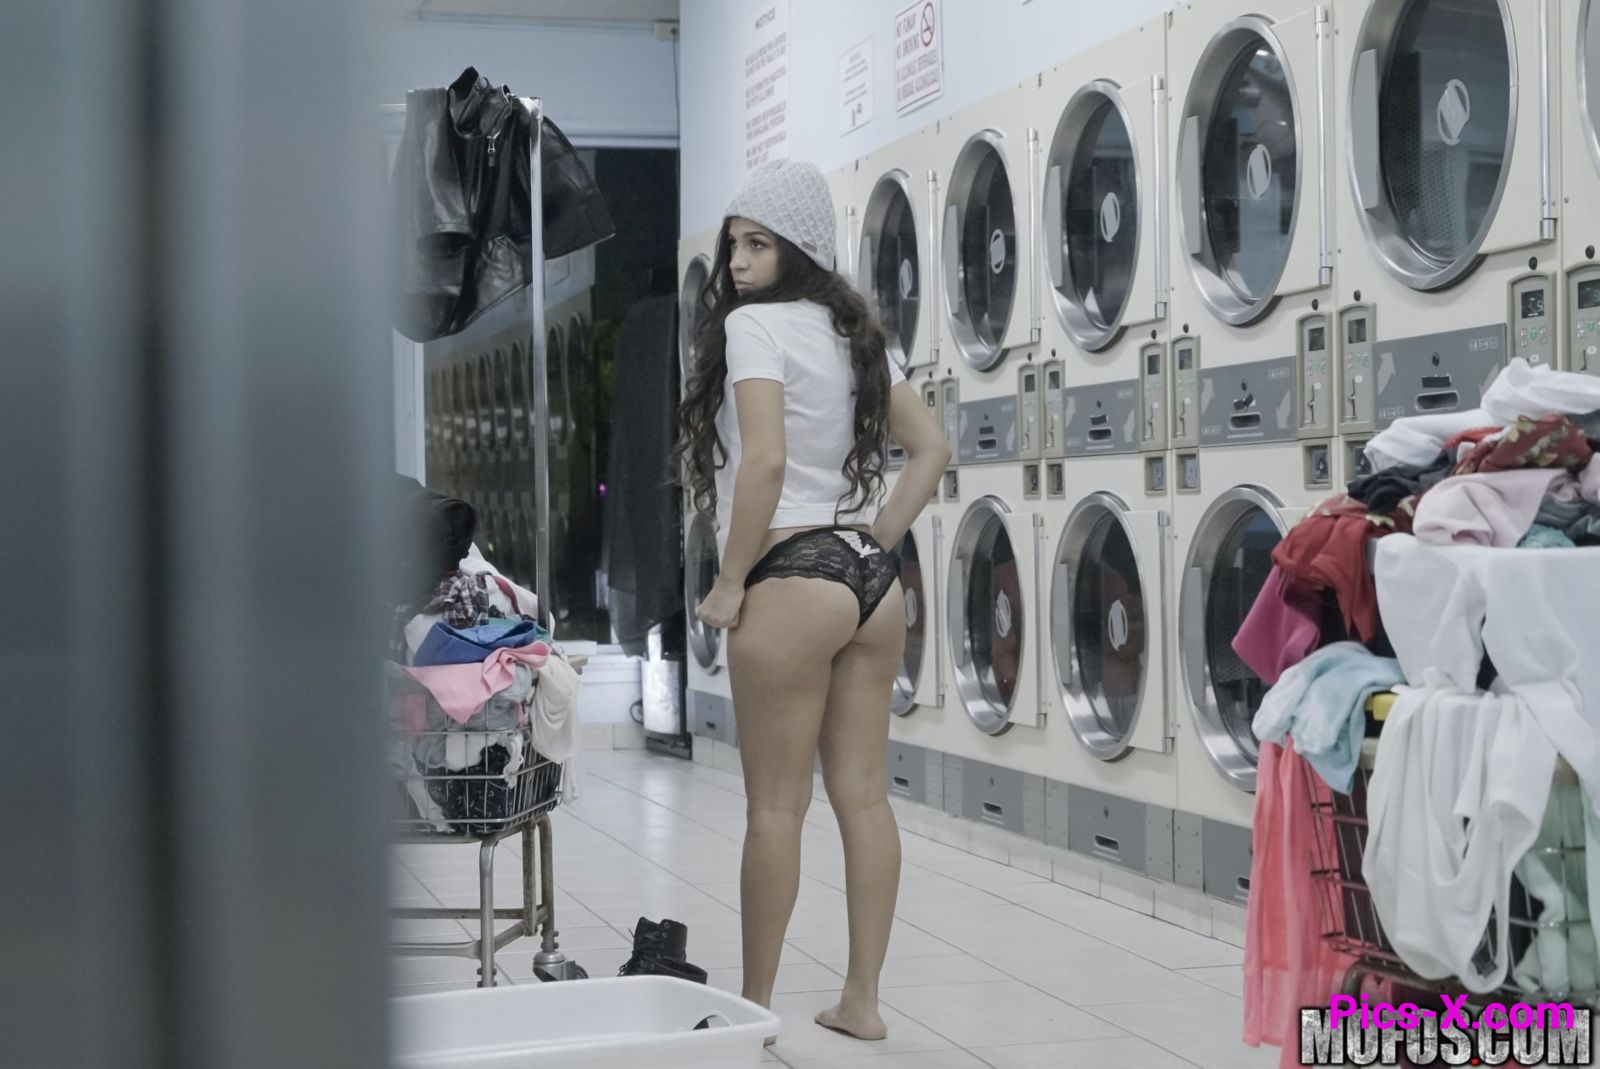 Latina Gets Facial In Laundromat - Pervs On Patrol - Image 8